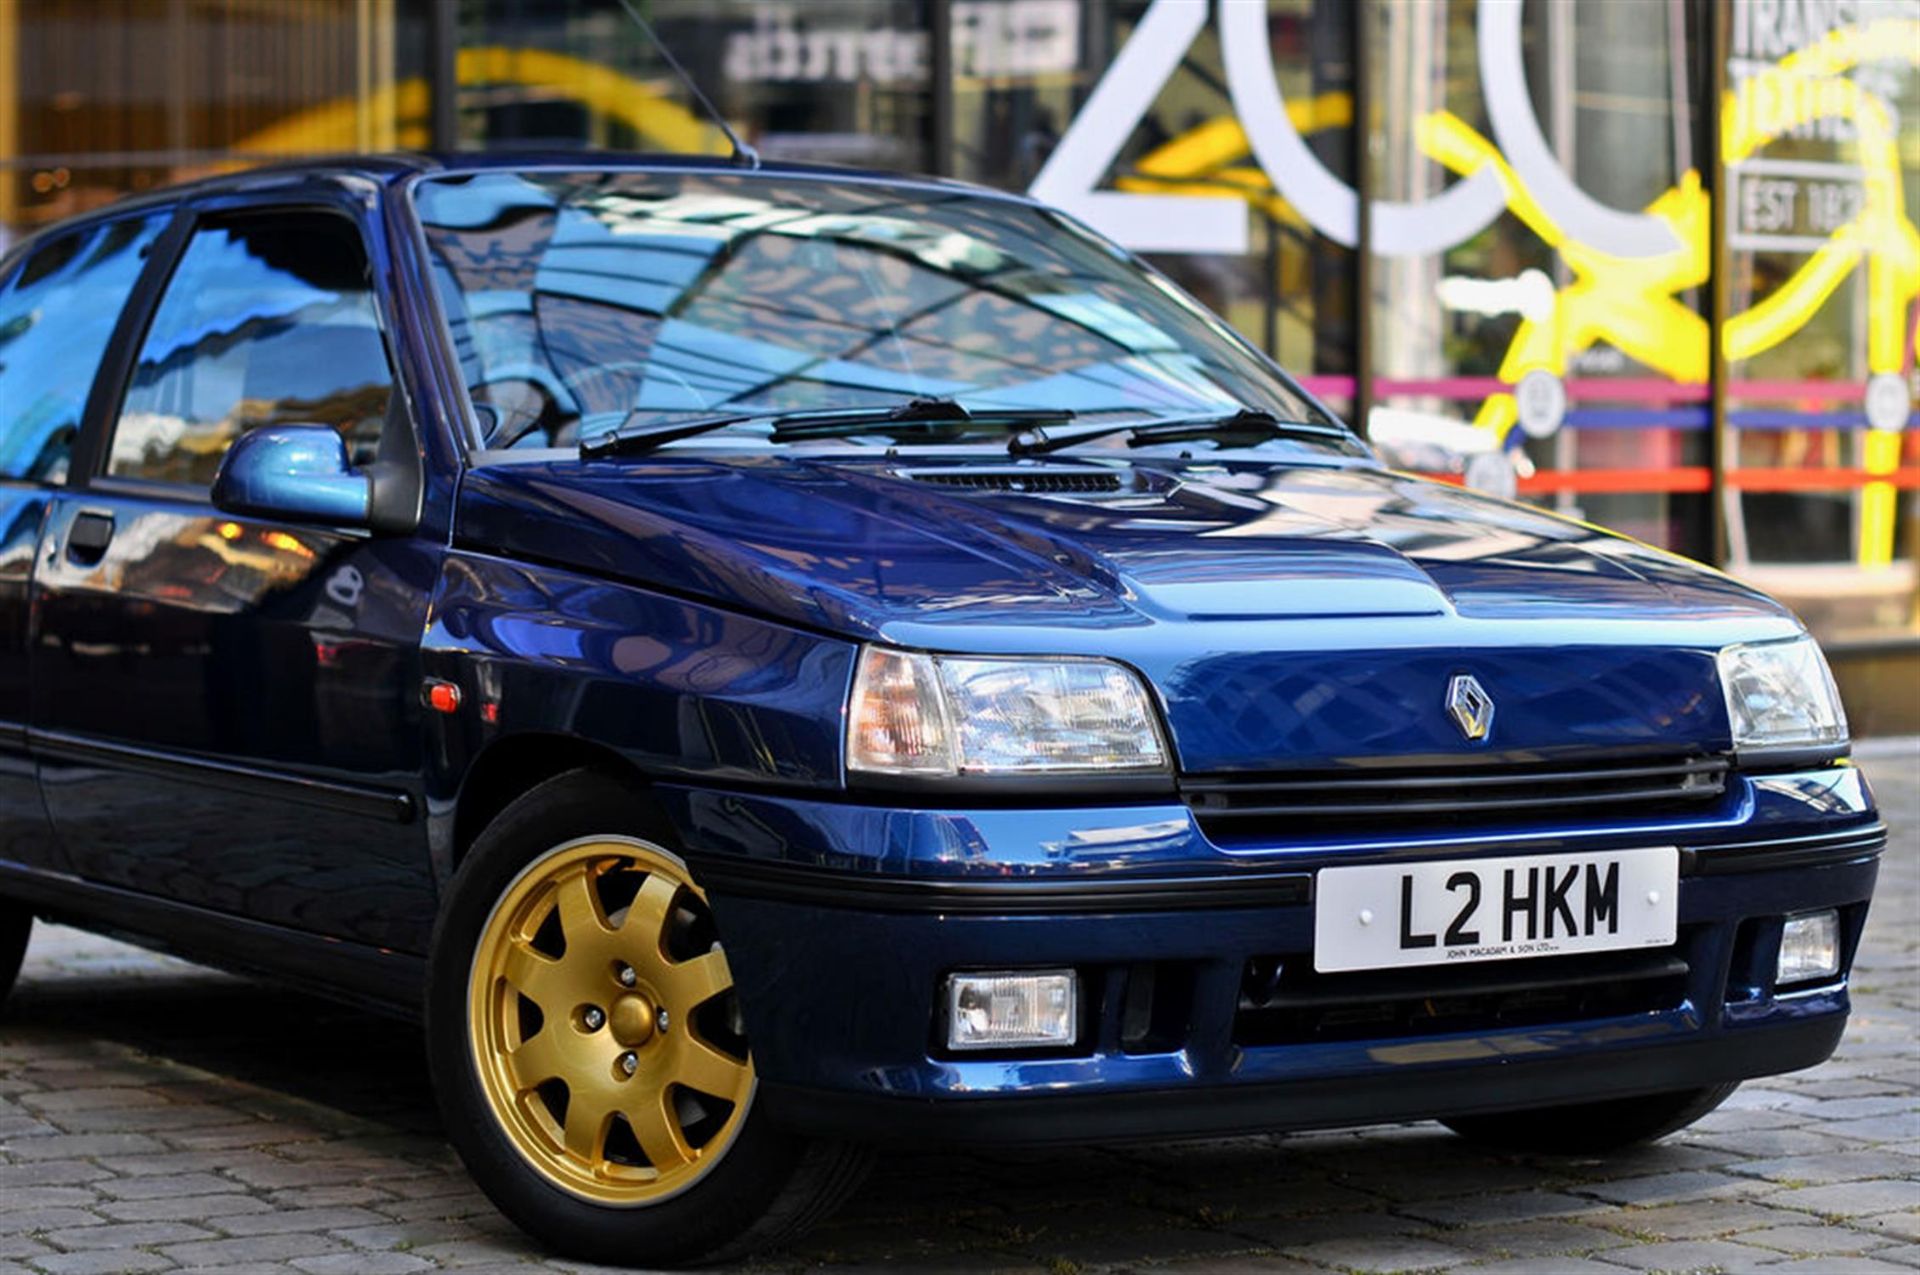 1994 Renault Clio Williams (Phase One) #0180 - Image 10 of 10